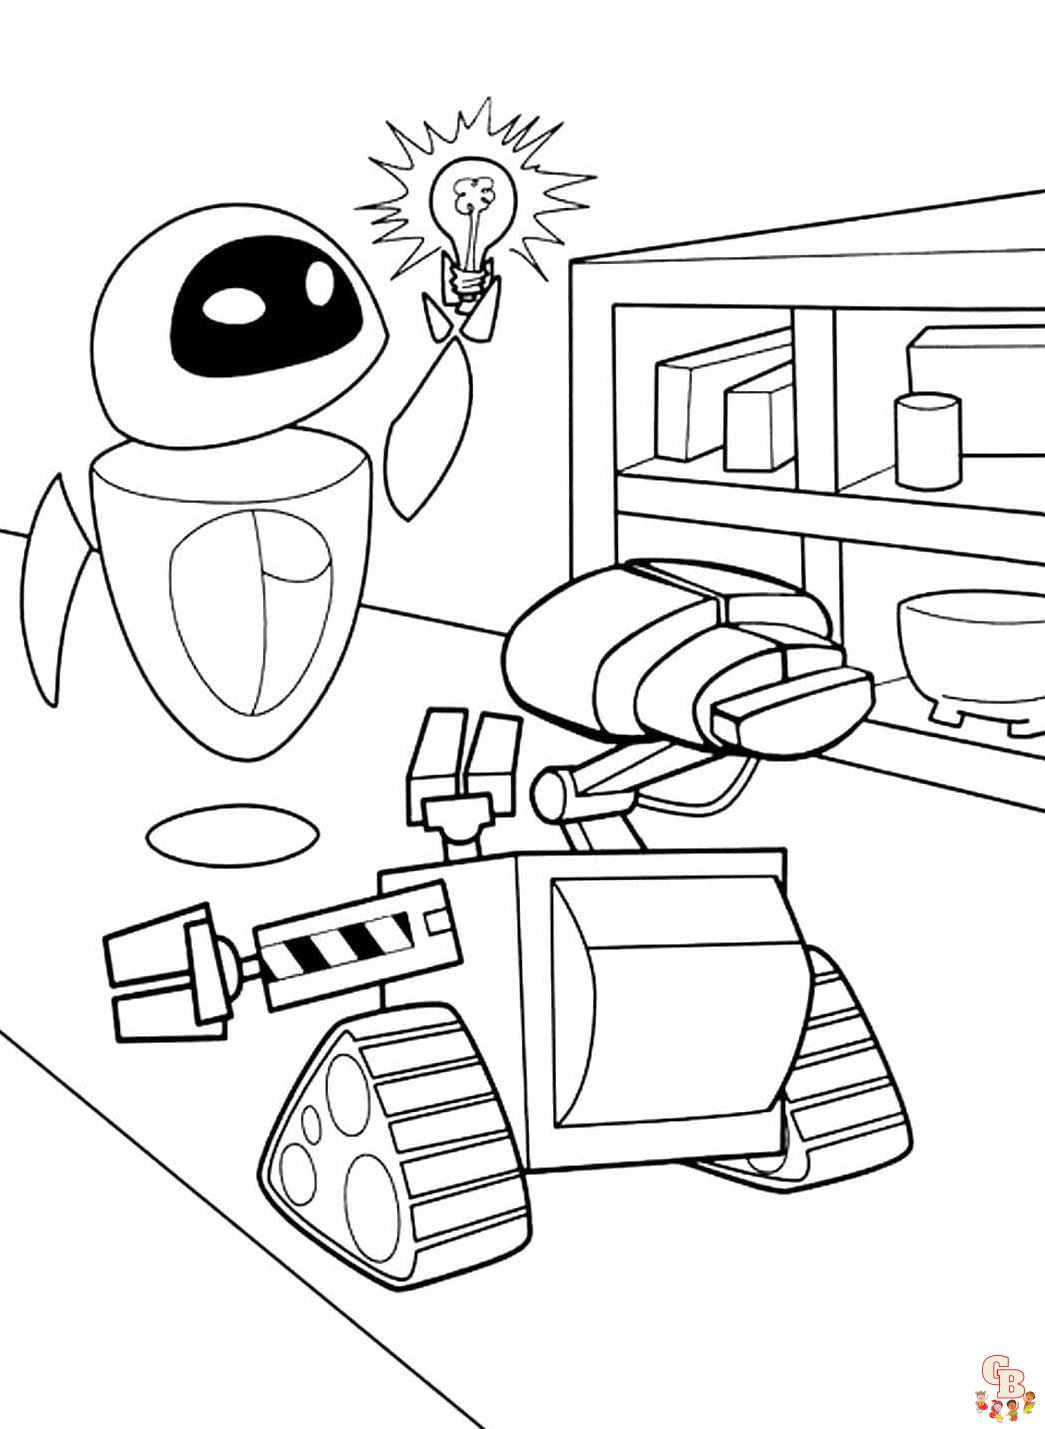 Wall E coloring pages to print